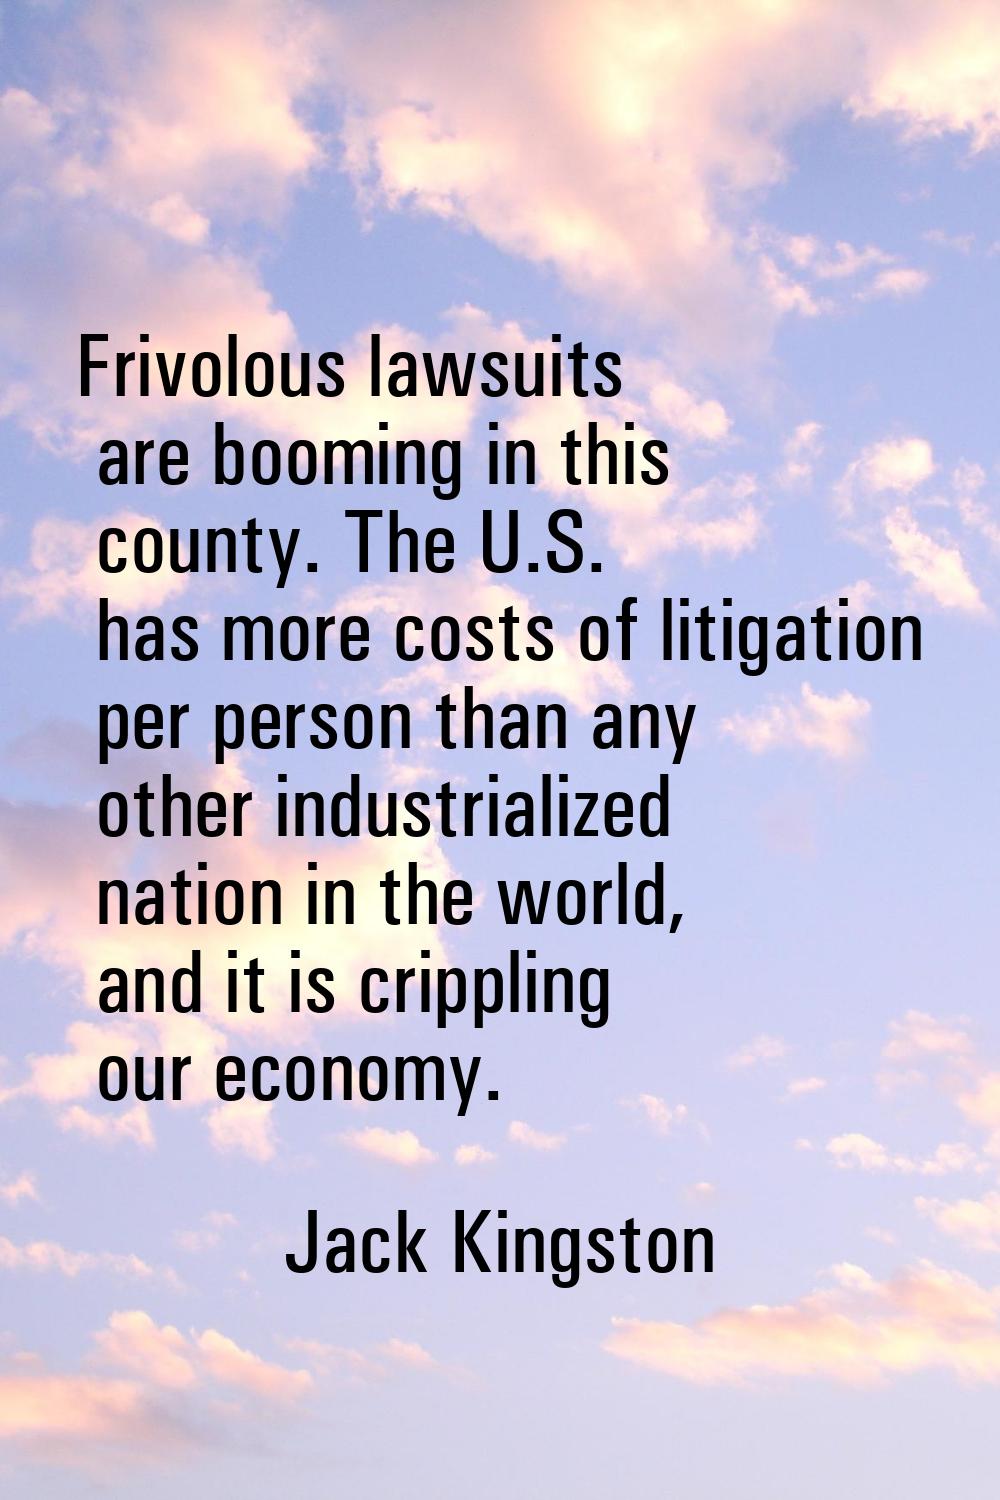 Frivolous lawsuits are booming in this county. The U.S. has more costs of litigation per person tha